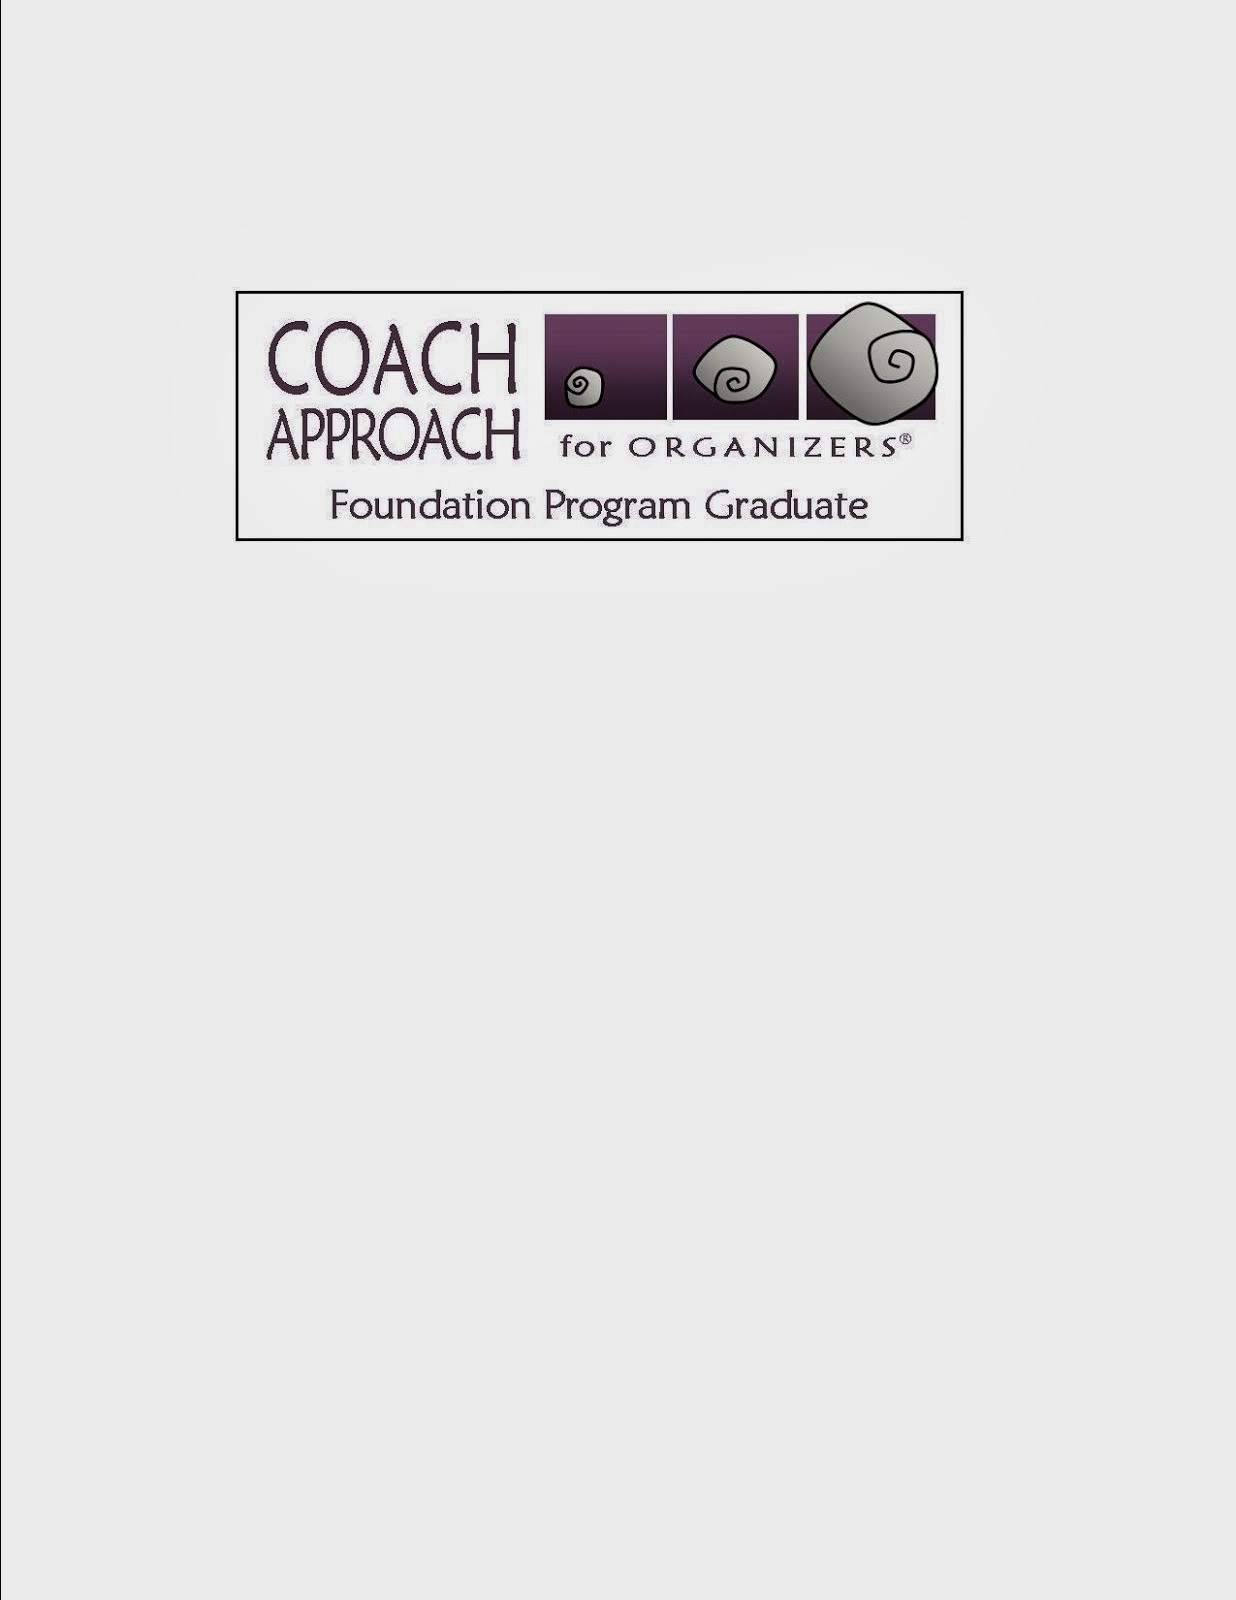 Coach Approach for Organizers